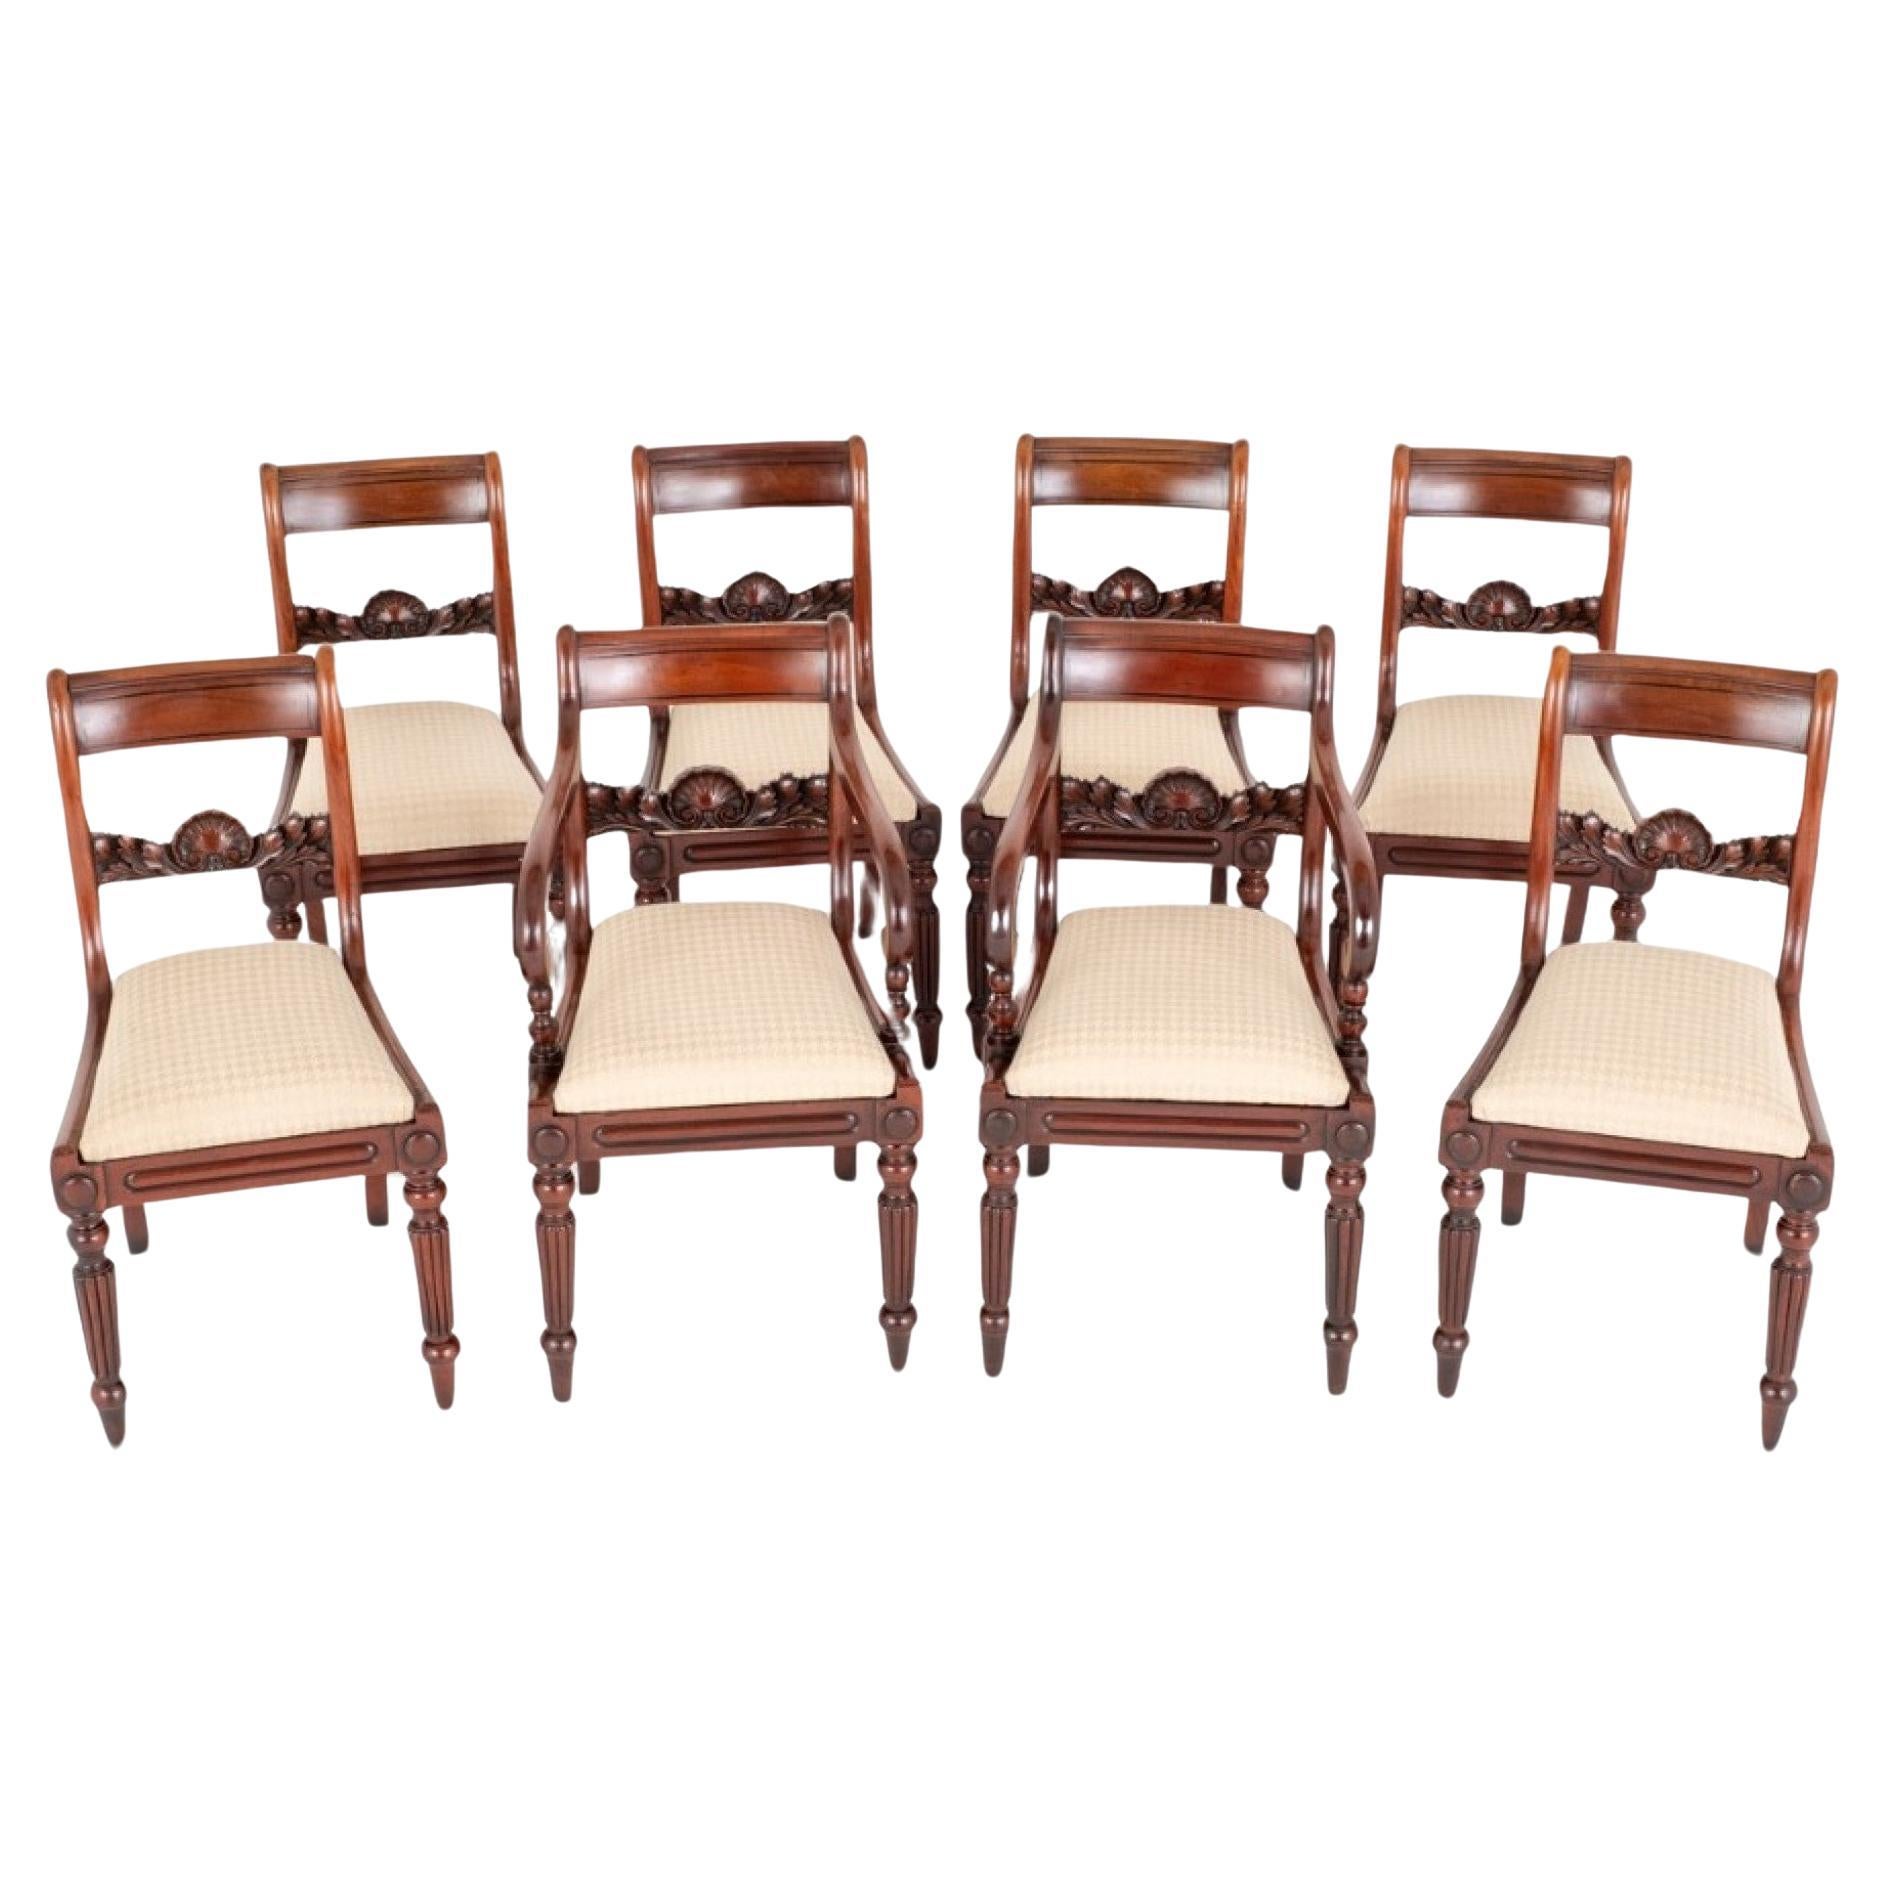 Set Period Regency Dining Chairs Mahogany Antique